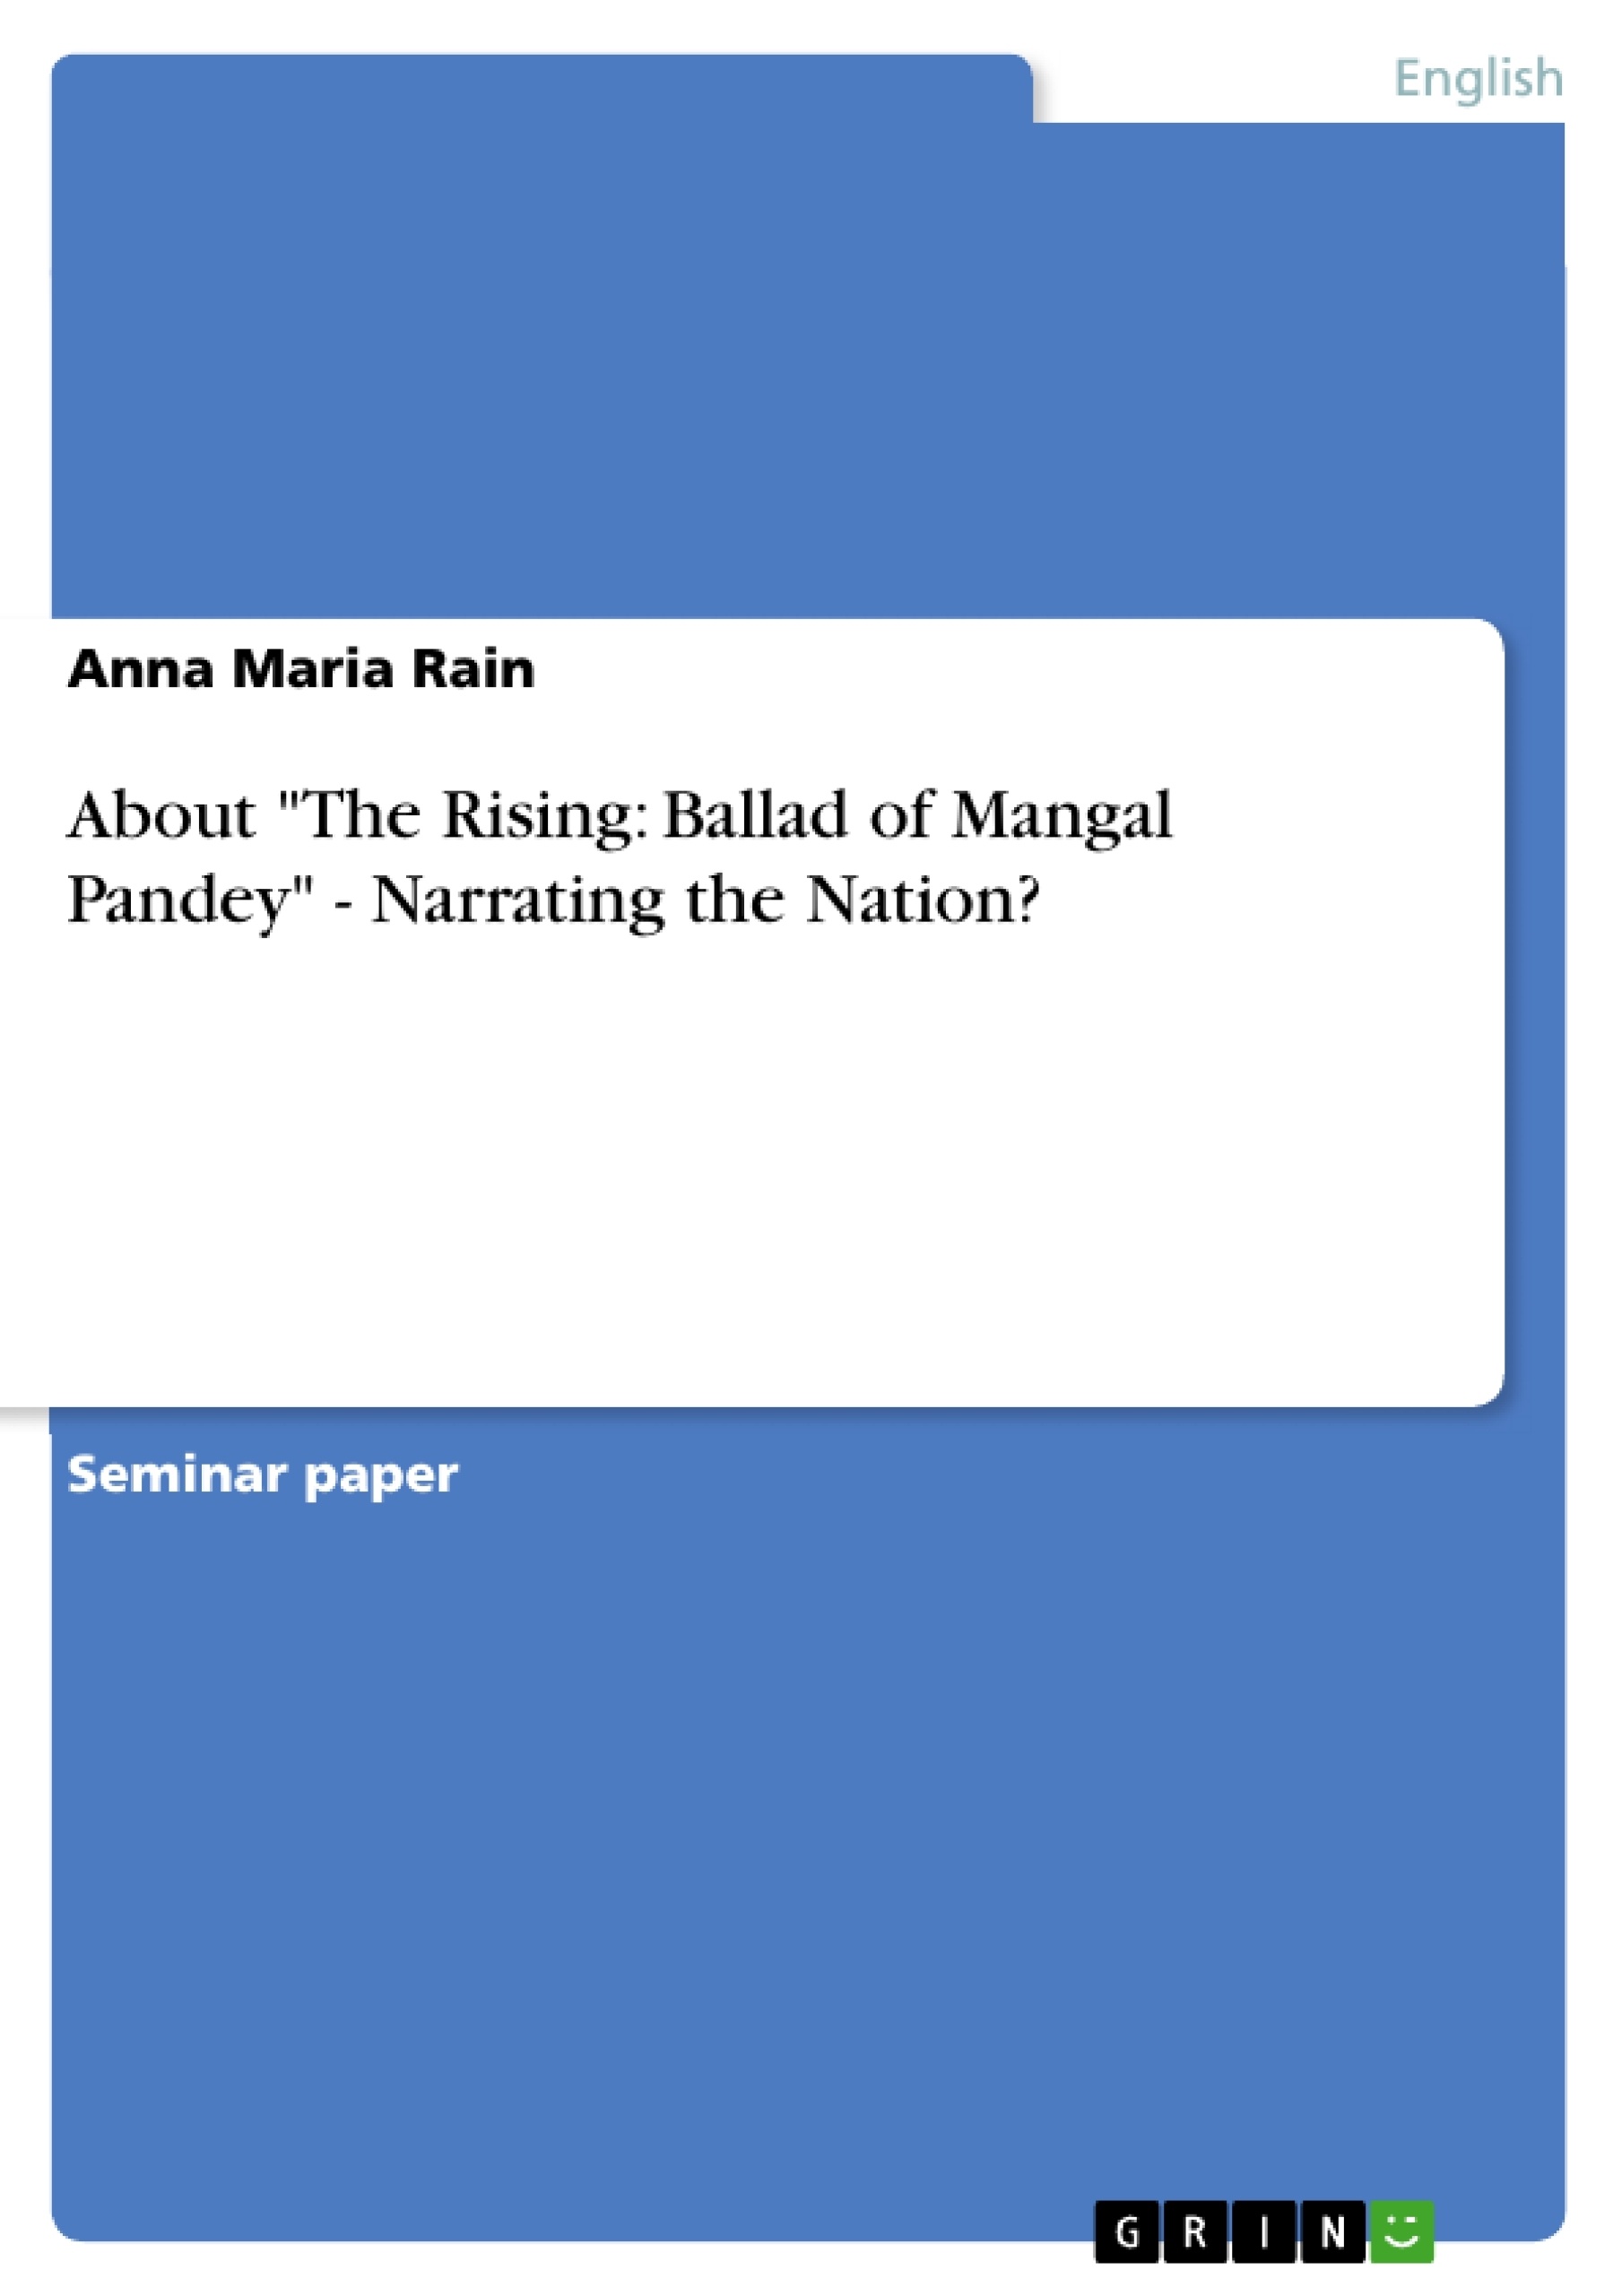 Título: About "The Rising: Ballad of Mangal Pandey" - Narrating the Nation?